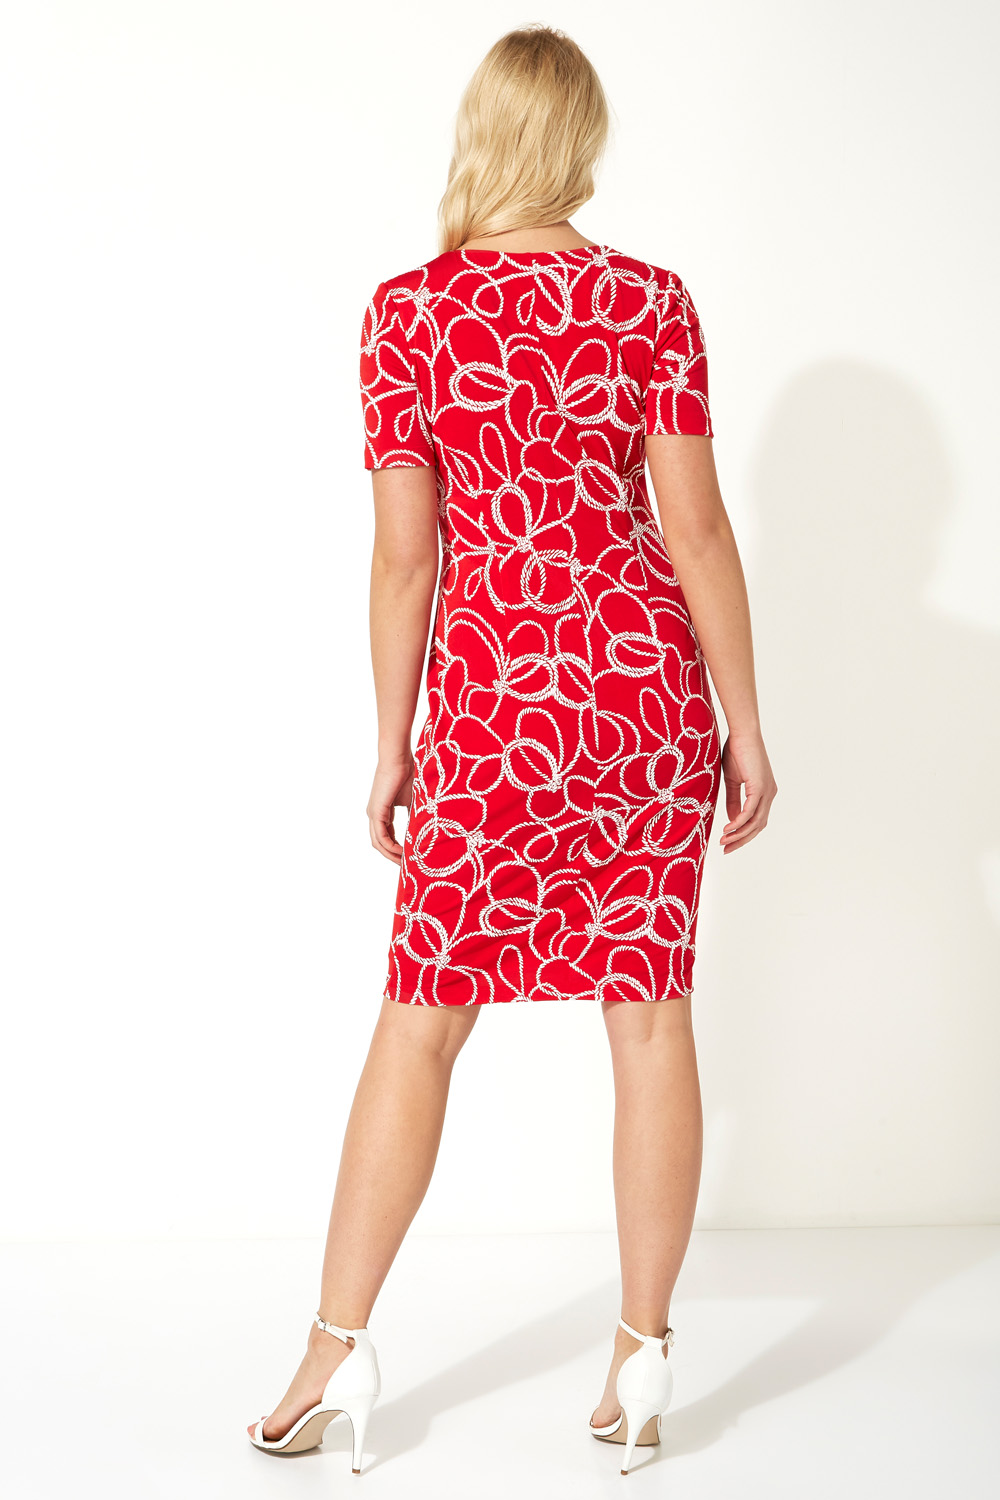 Red Nautical Rope Print Shift Dress, Image 2 of 4